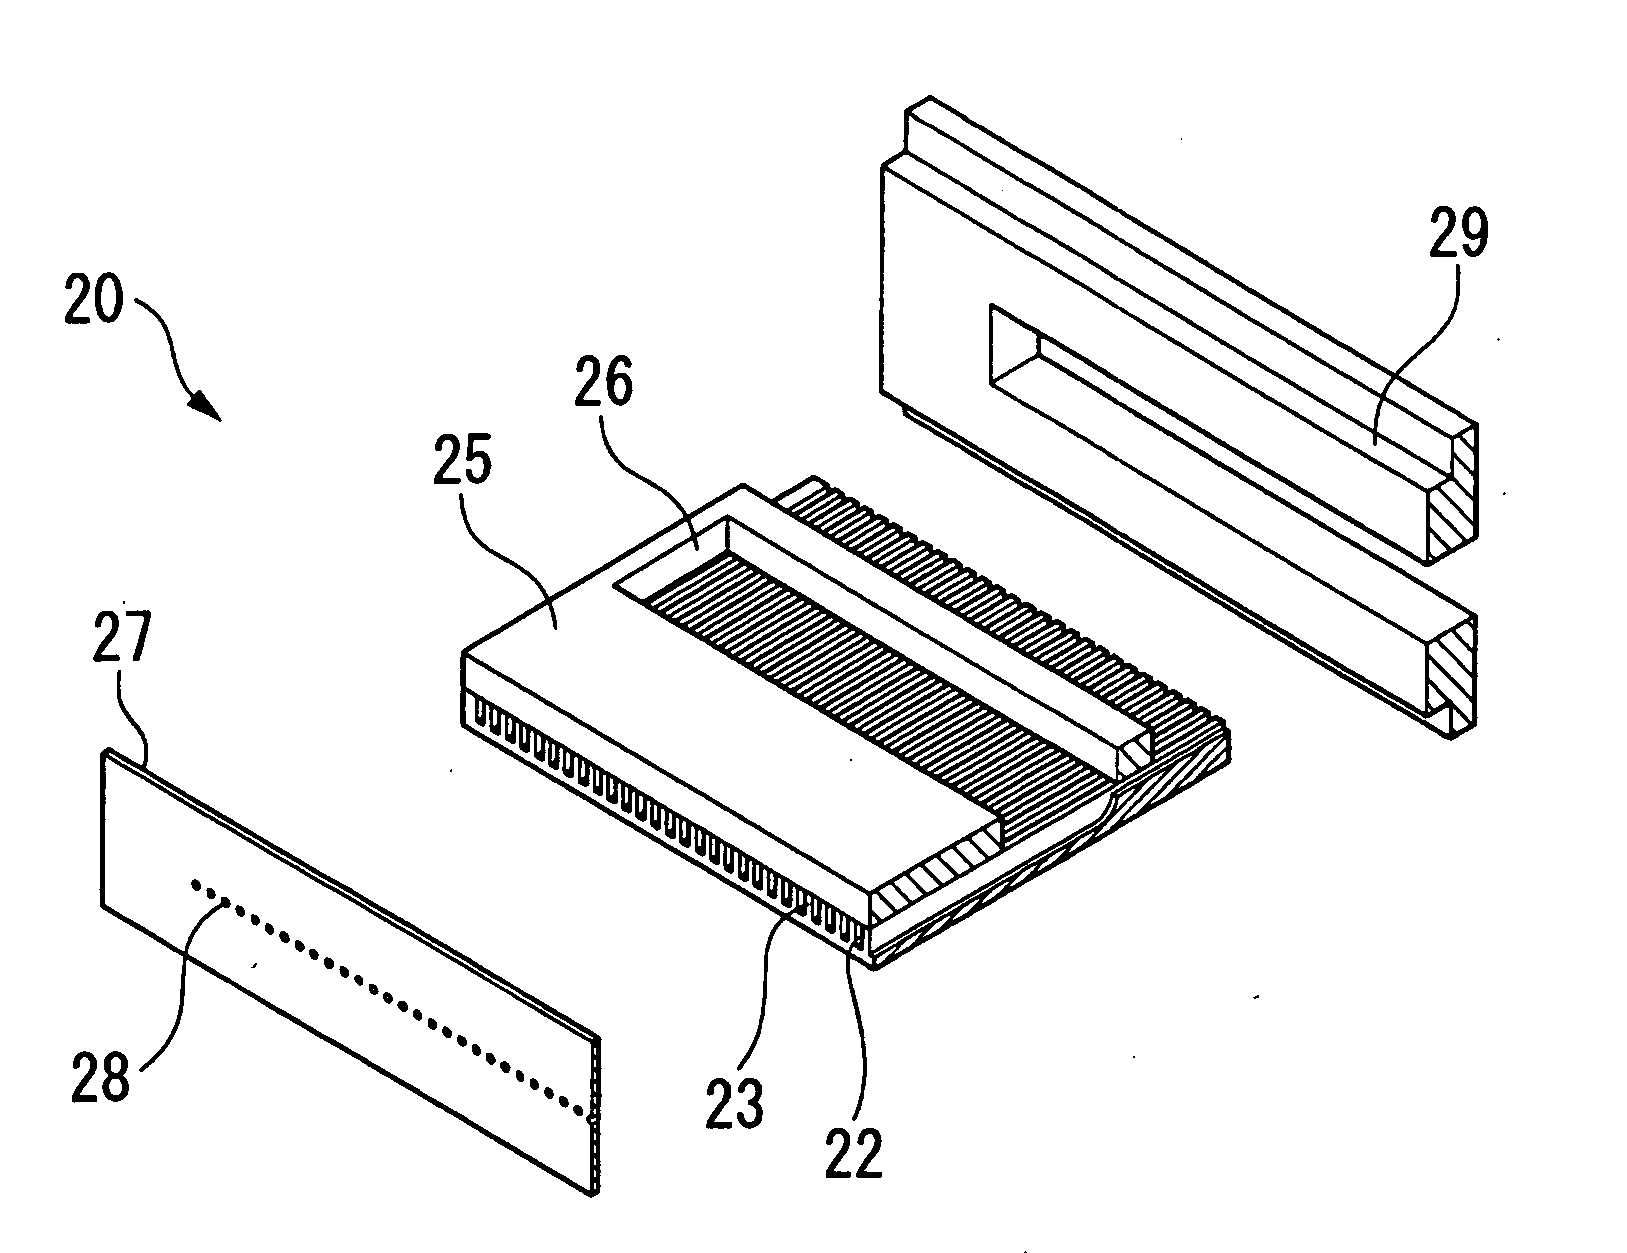 Ink jet head nozzle plate manufacturing method, Ink jet head nozzle plate manufacturing apparatus, Ink jet head nozzle plate, Ink jet head, and Ink jet recording apparatus